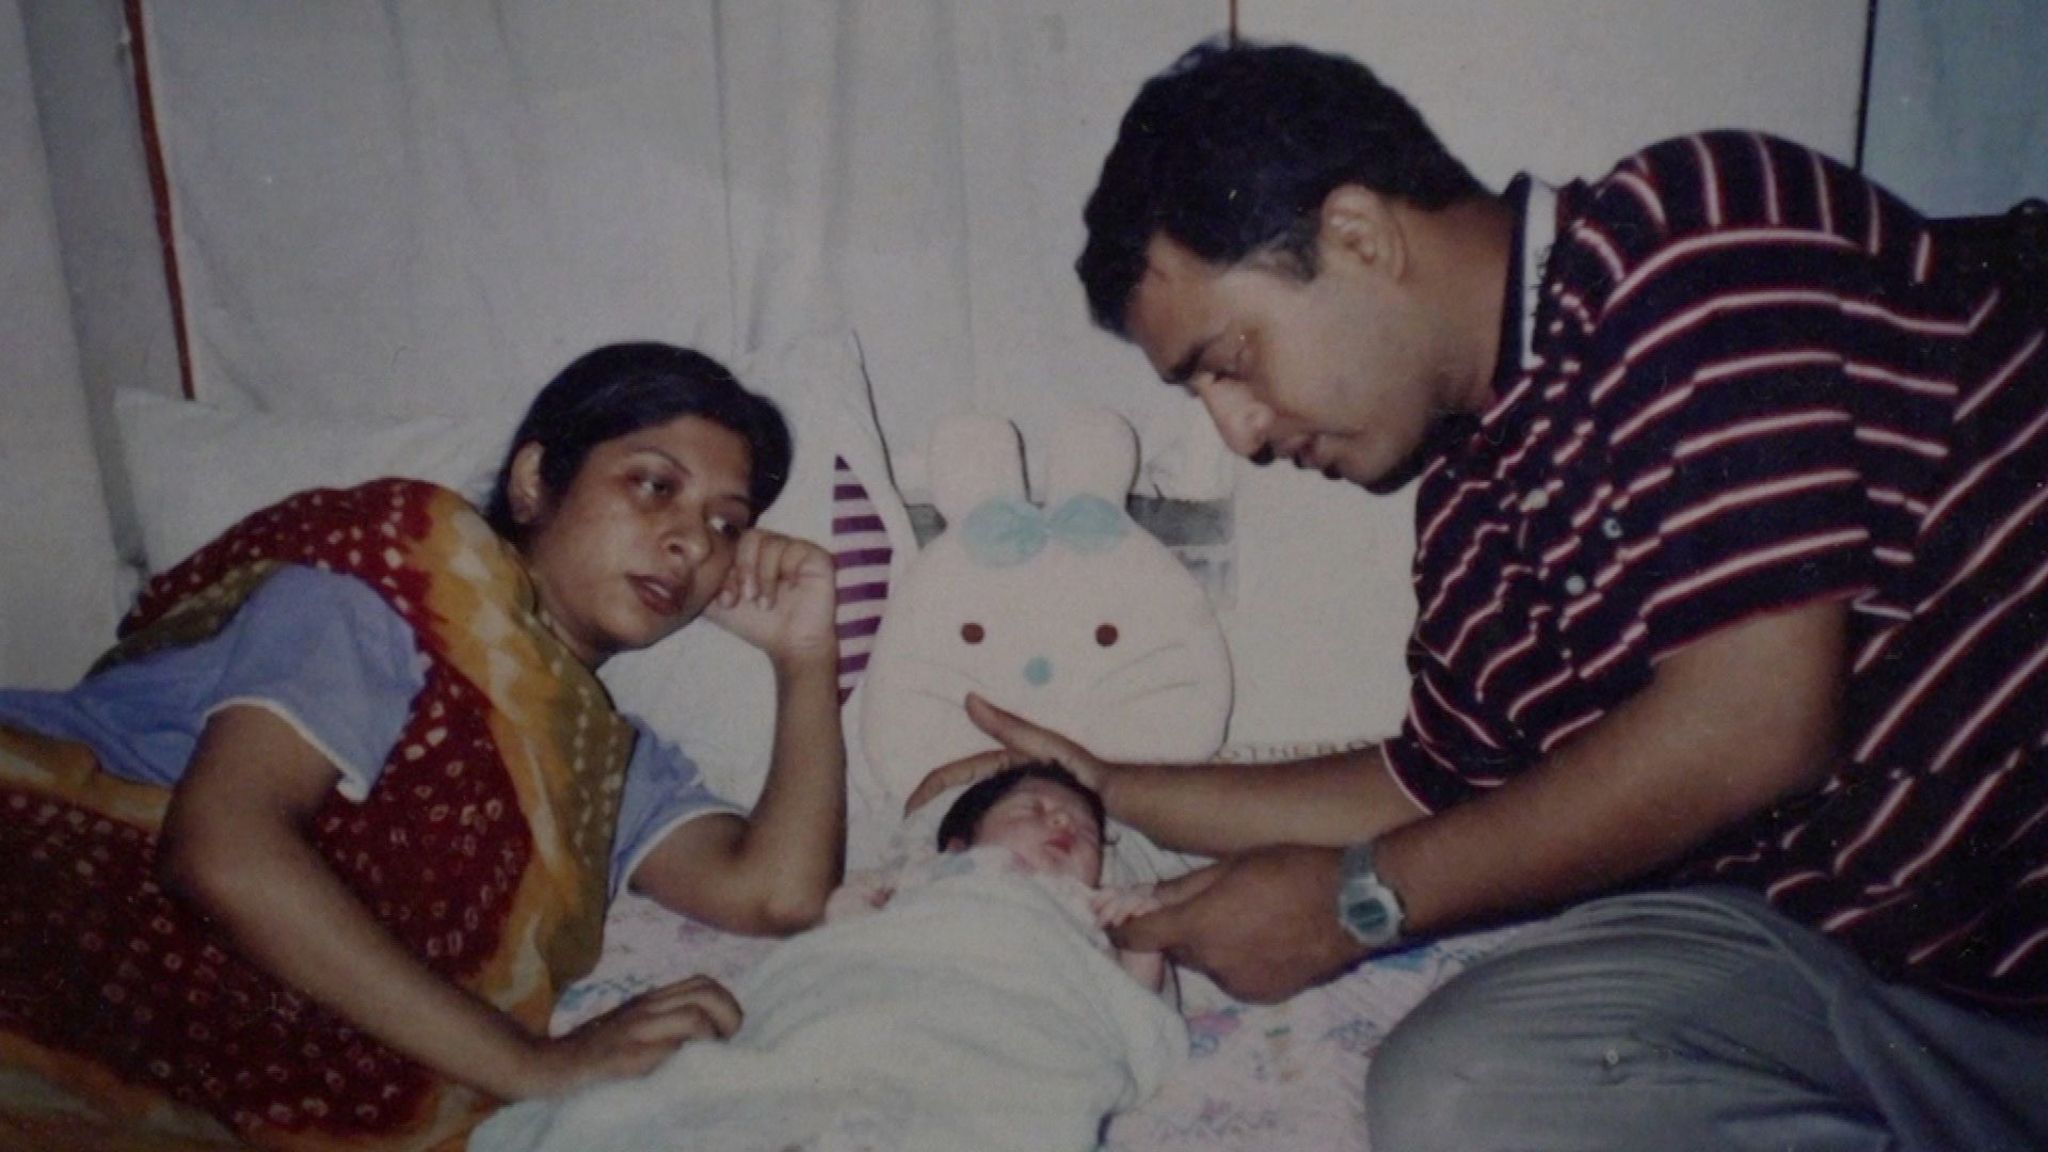 Moshiur, his wife and then baby daughter in Dhaka